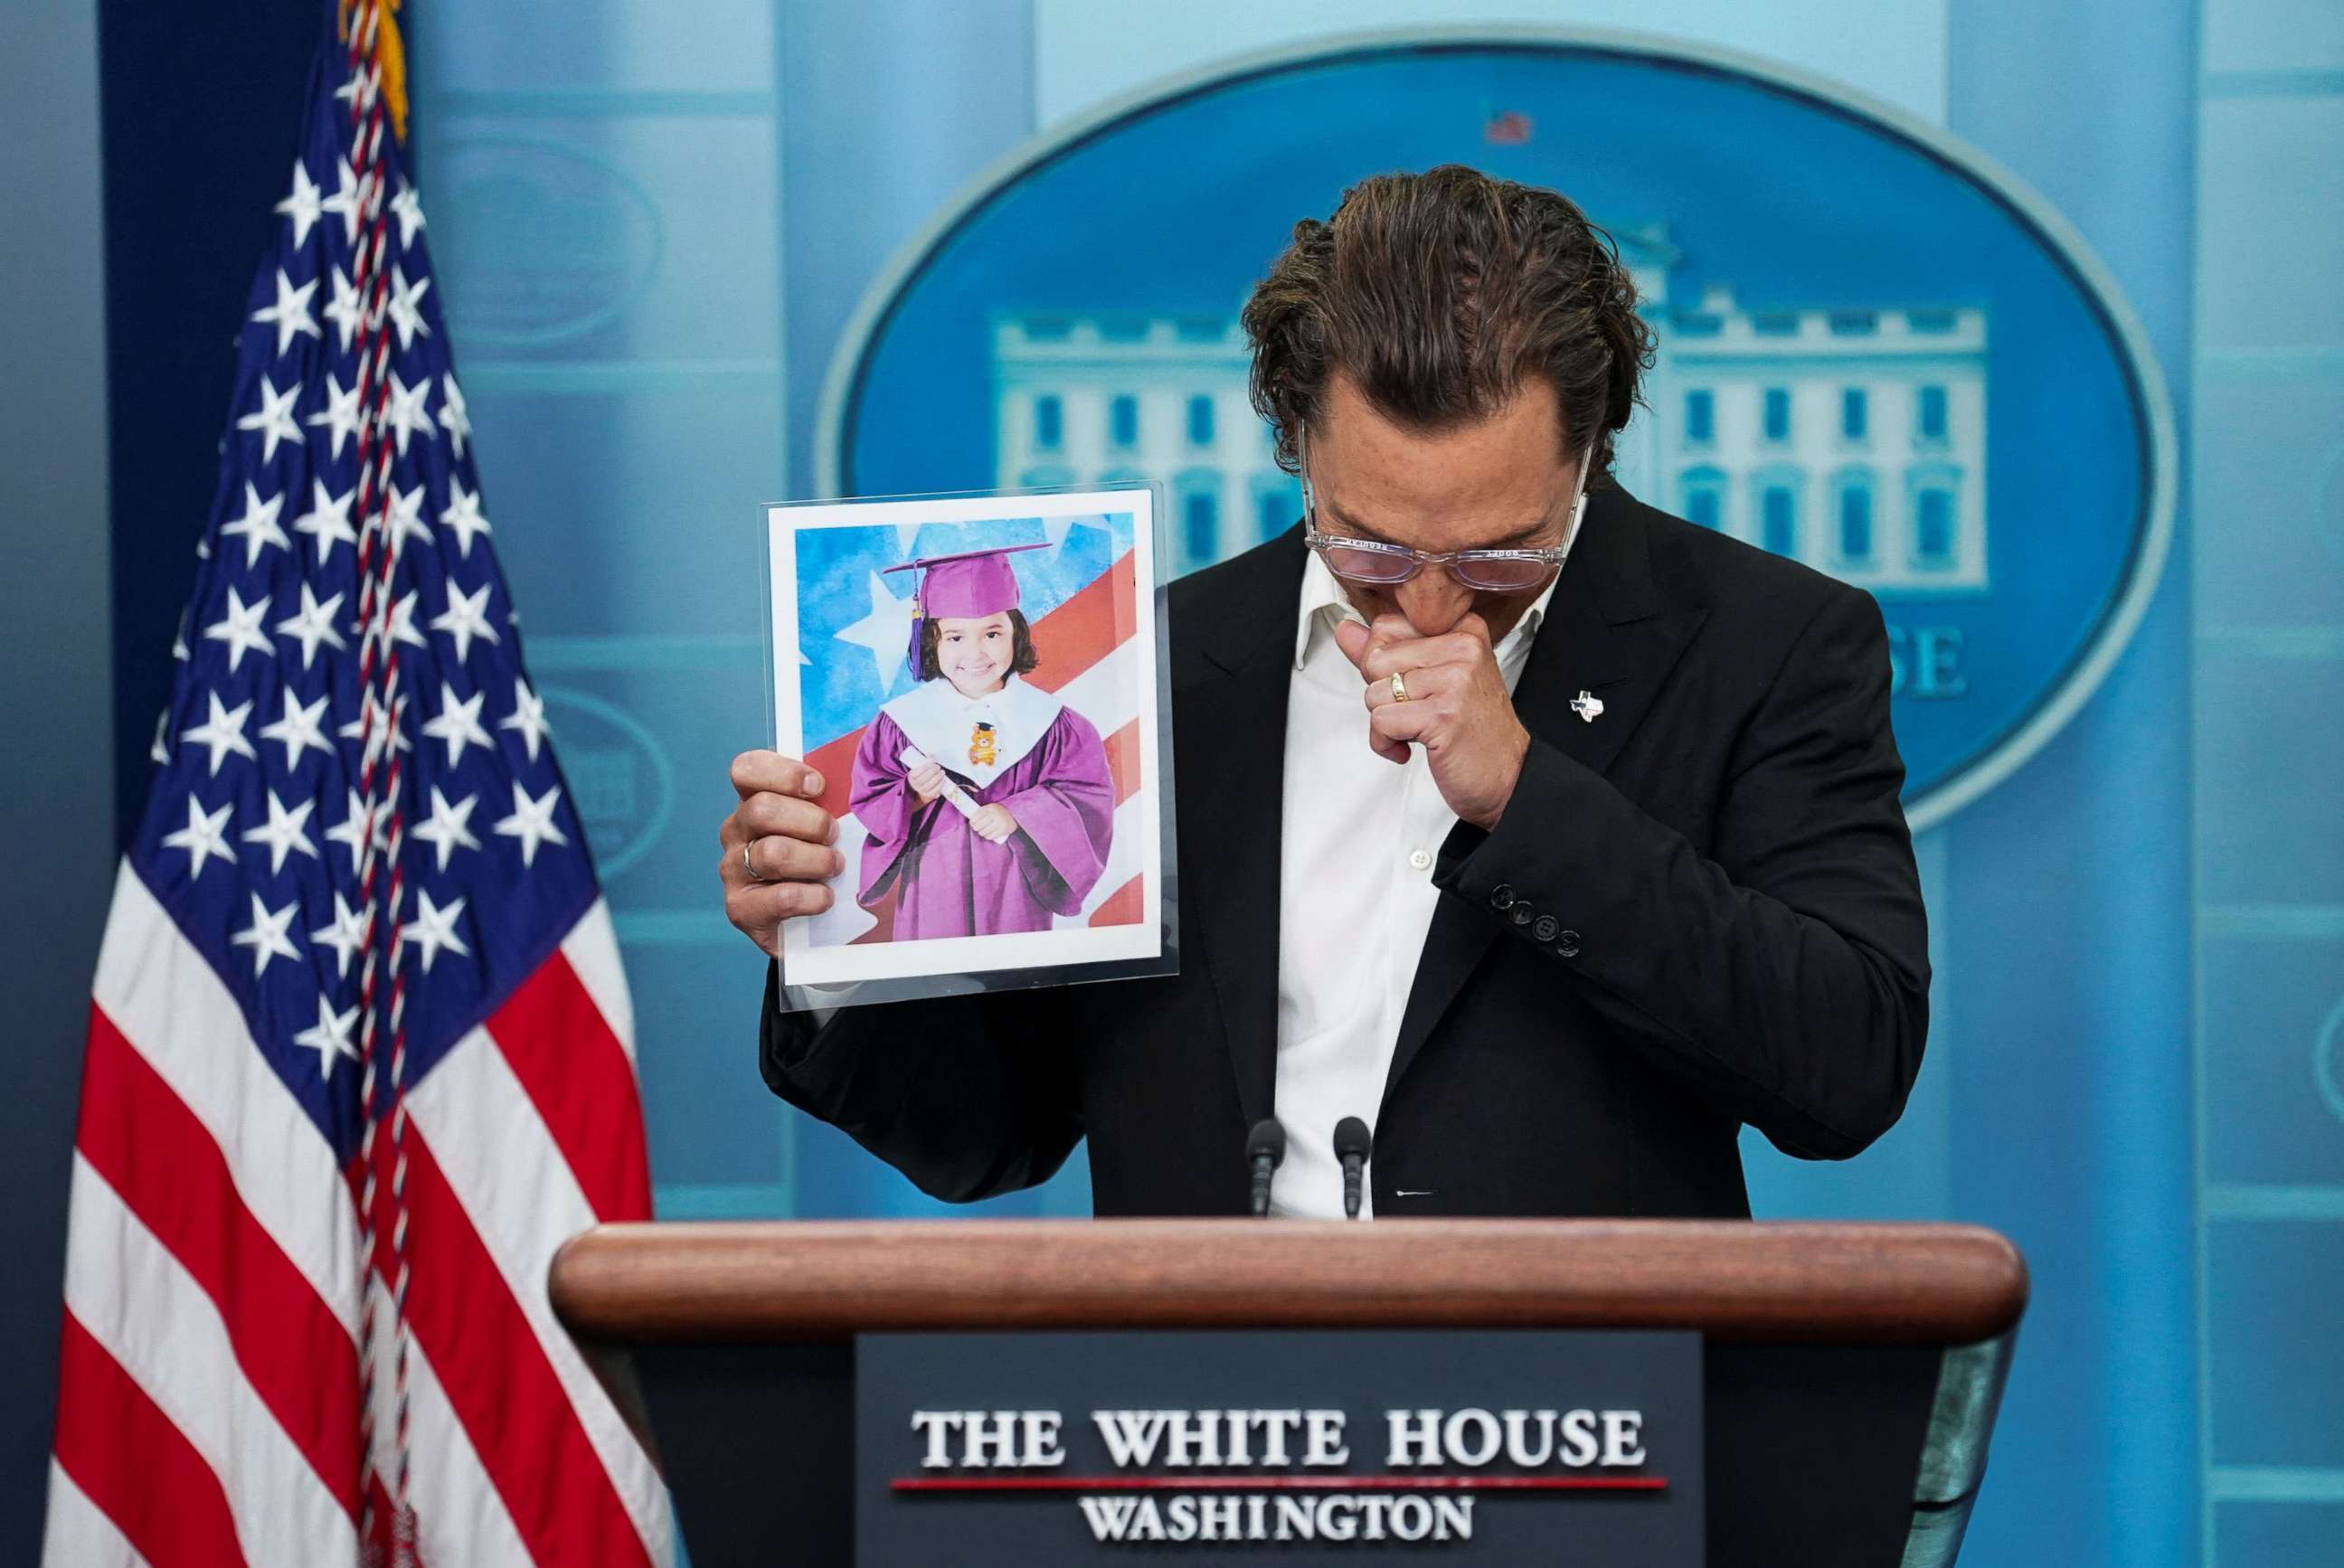 PHOTO: Matthew McConaughey becomes emotional as he holds up a picture of 10-year-old victim Alithia Ramirez as he speaks to reporters about the school shooting in Uvalde during a press briefing at the White House in Washington, June 7, 2022.